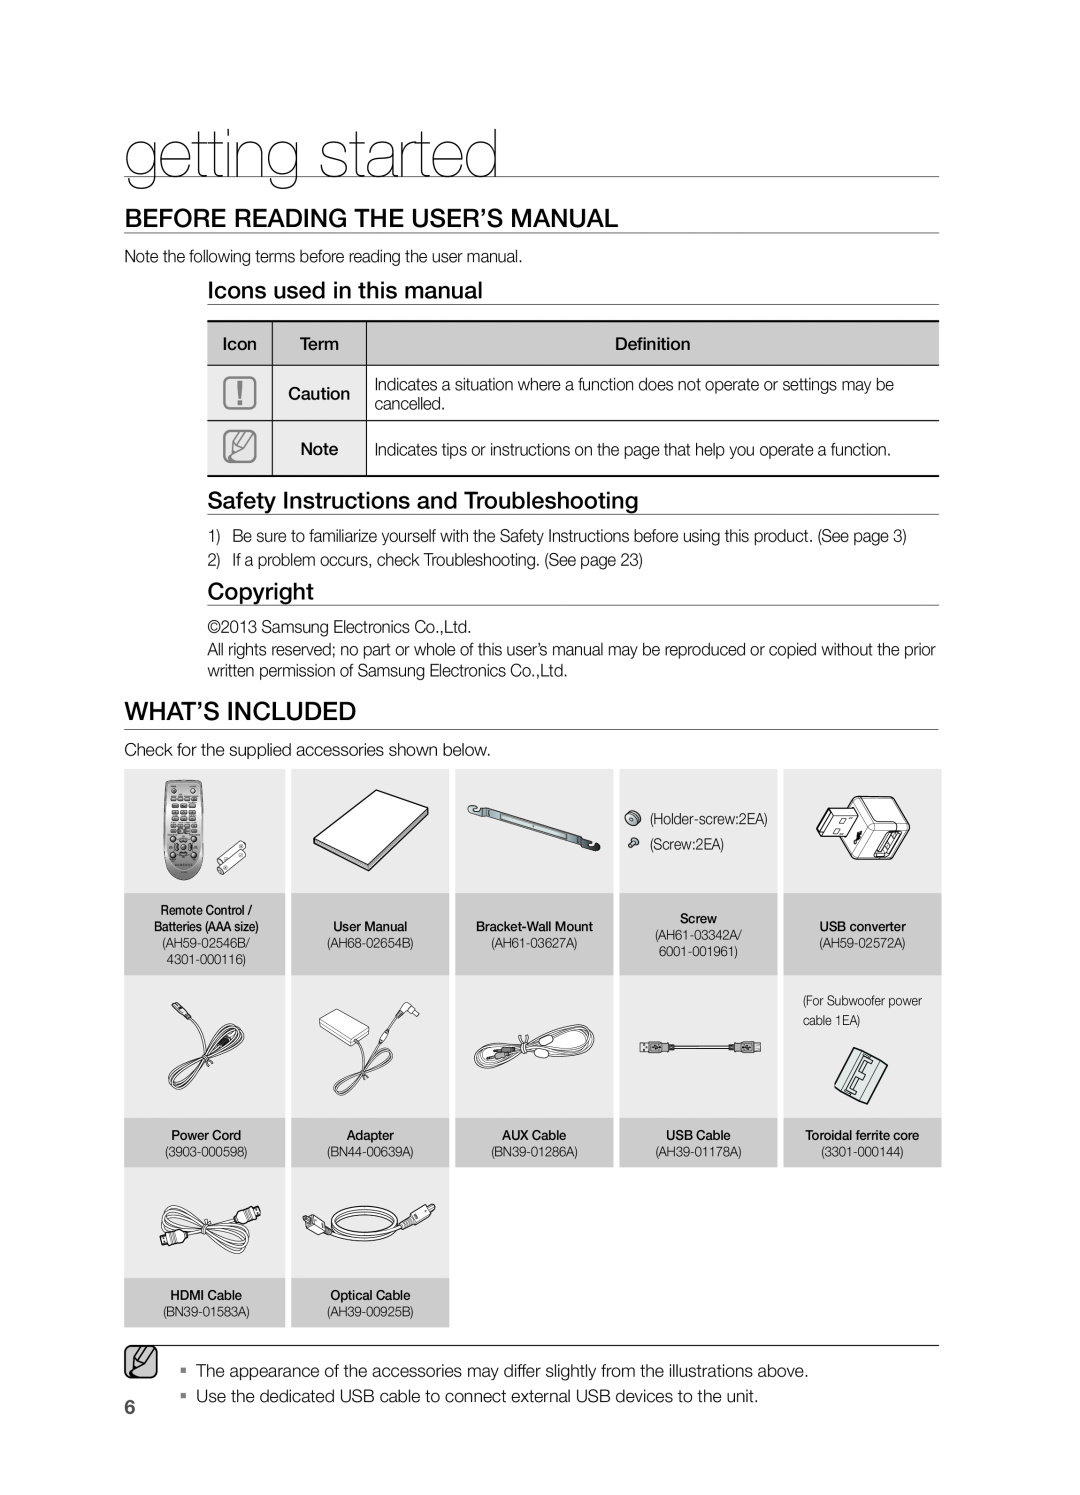 Samsung HW-FM55C getting started, WHAT’s inclUDED, Icons used in this manual, Safety Instructions and Troubleshooting 